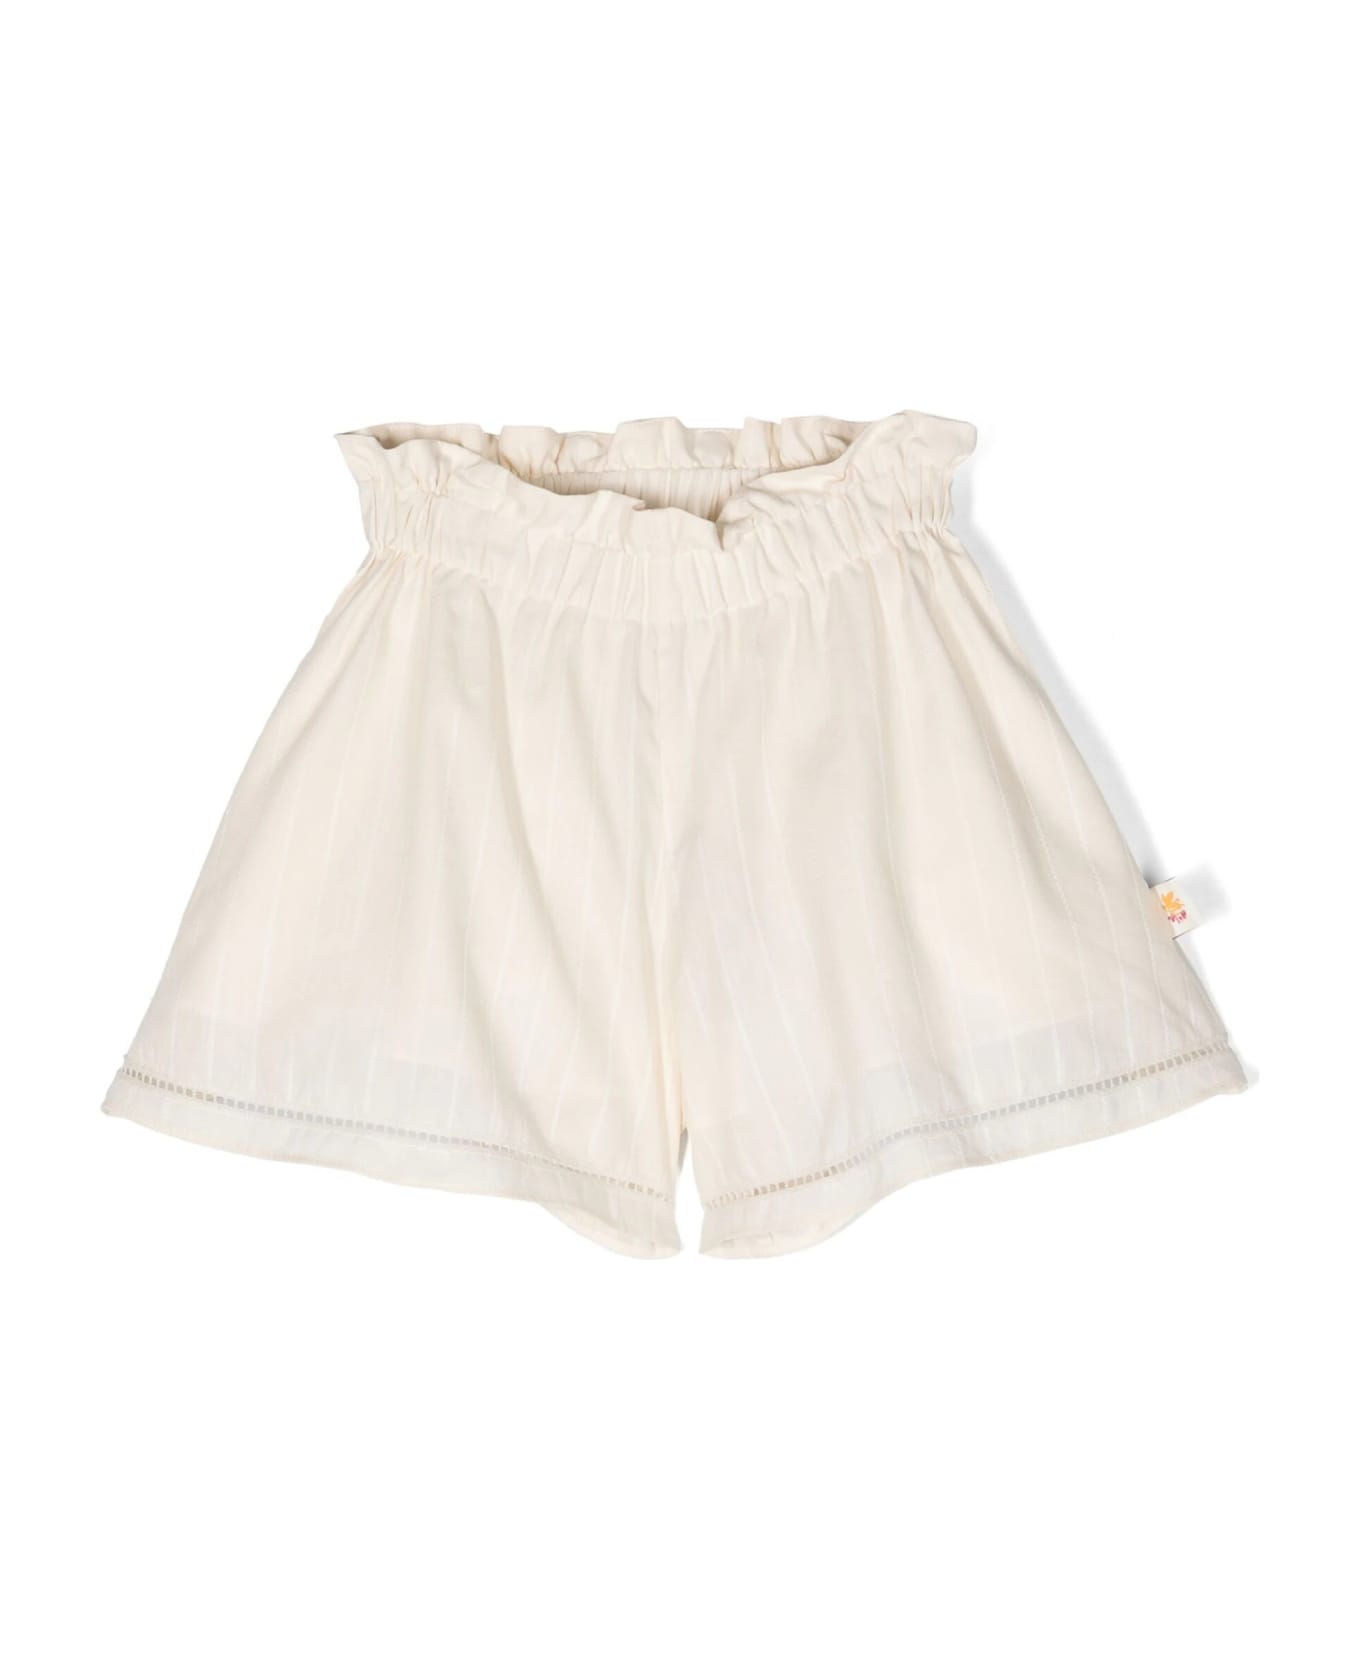 Etro Beige Pinstripe Shorts With Curled Waist - Brown ボトムス